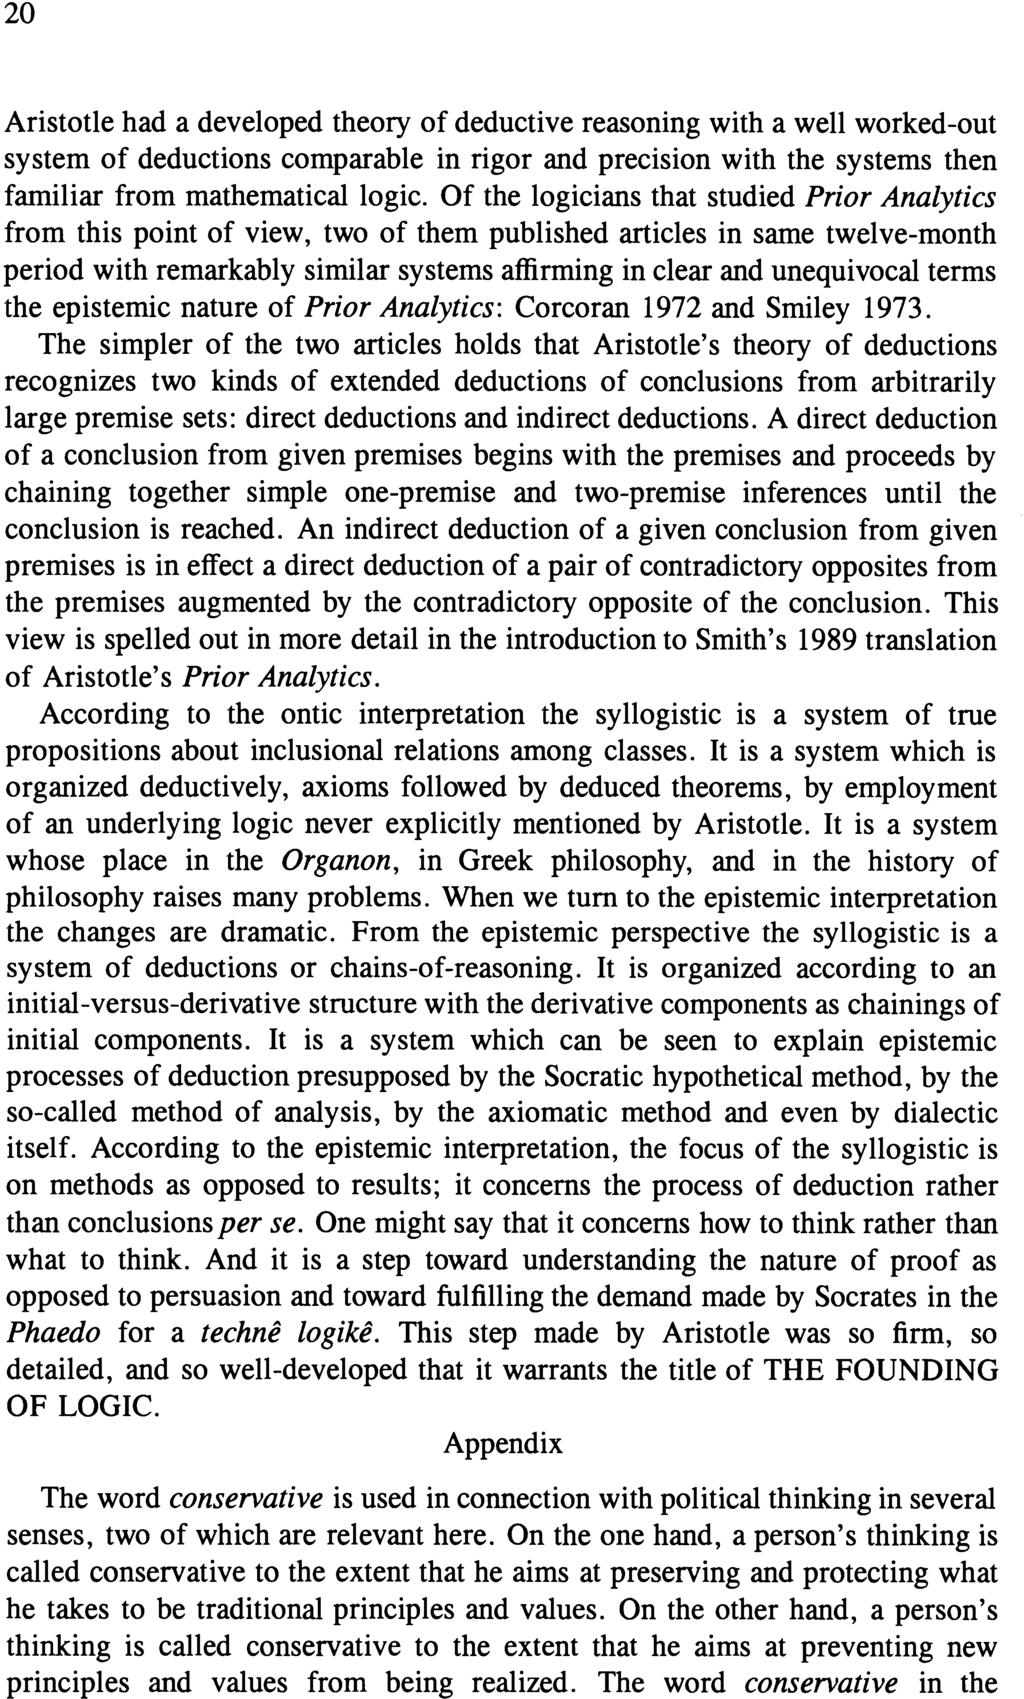 20 Aristotle had a developed theory of deductive reasoning with a well worked-out system of deductions comparable in rigor and precision with the systems then fanliliar from mathematical logic.